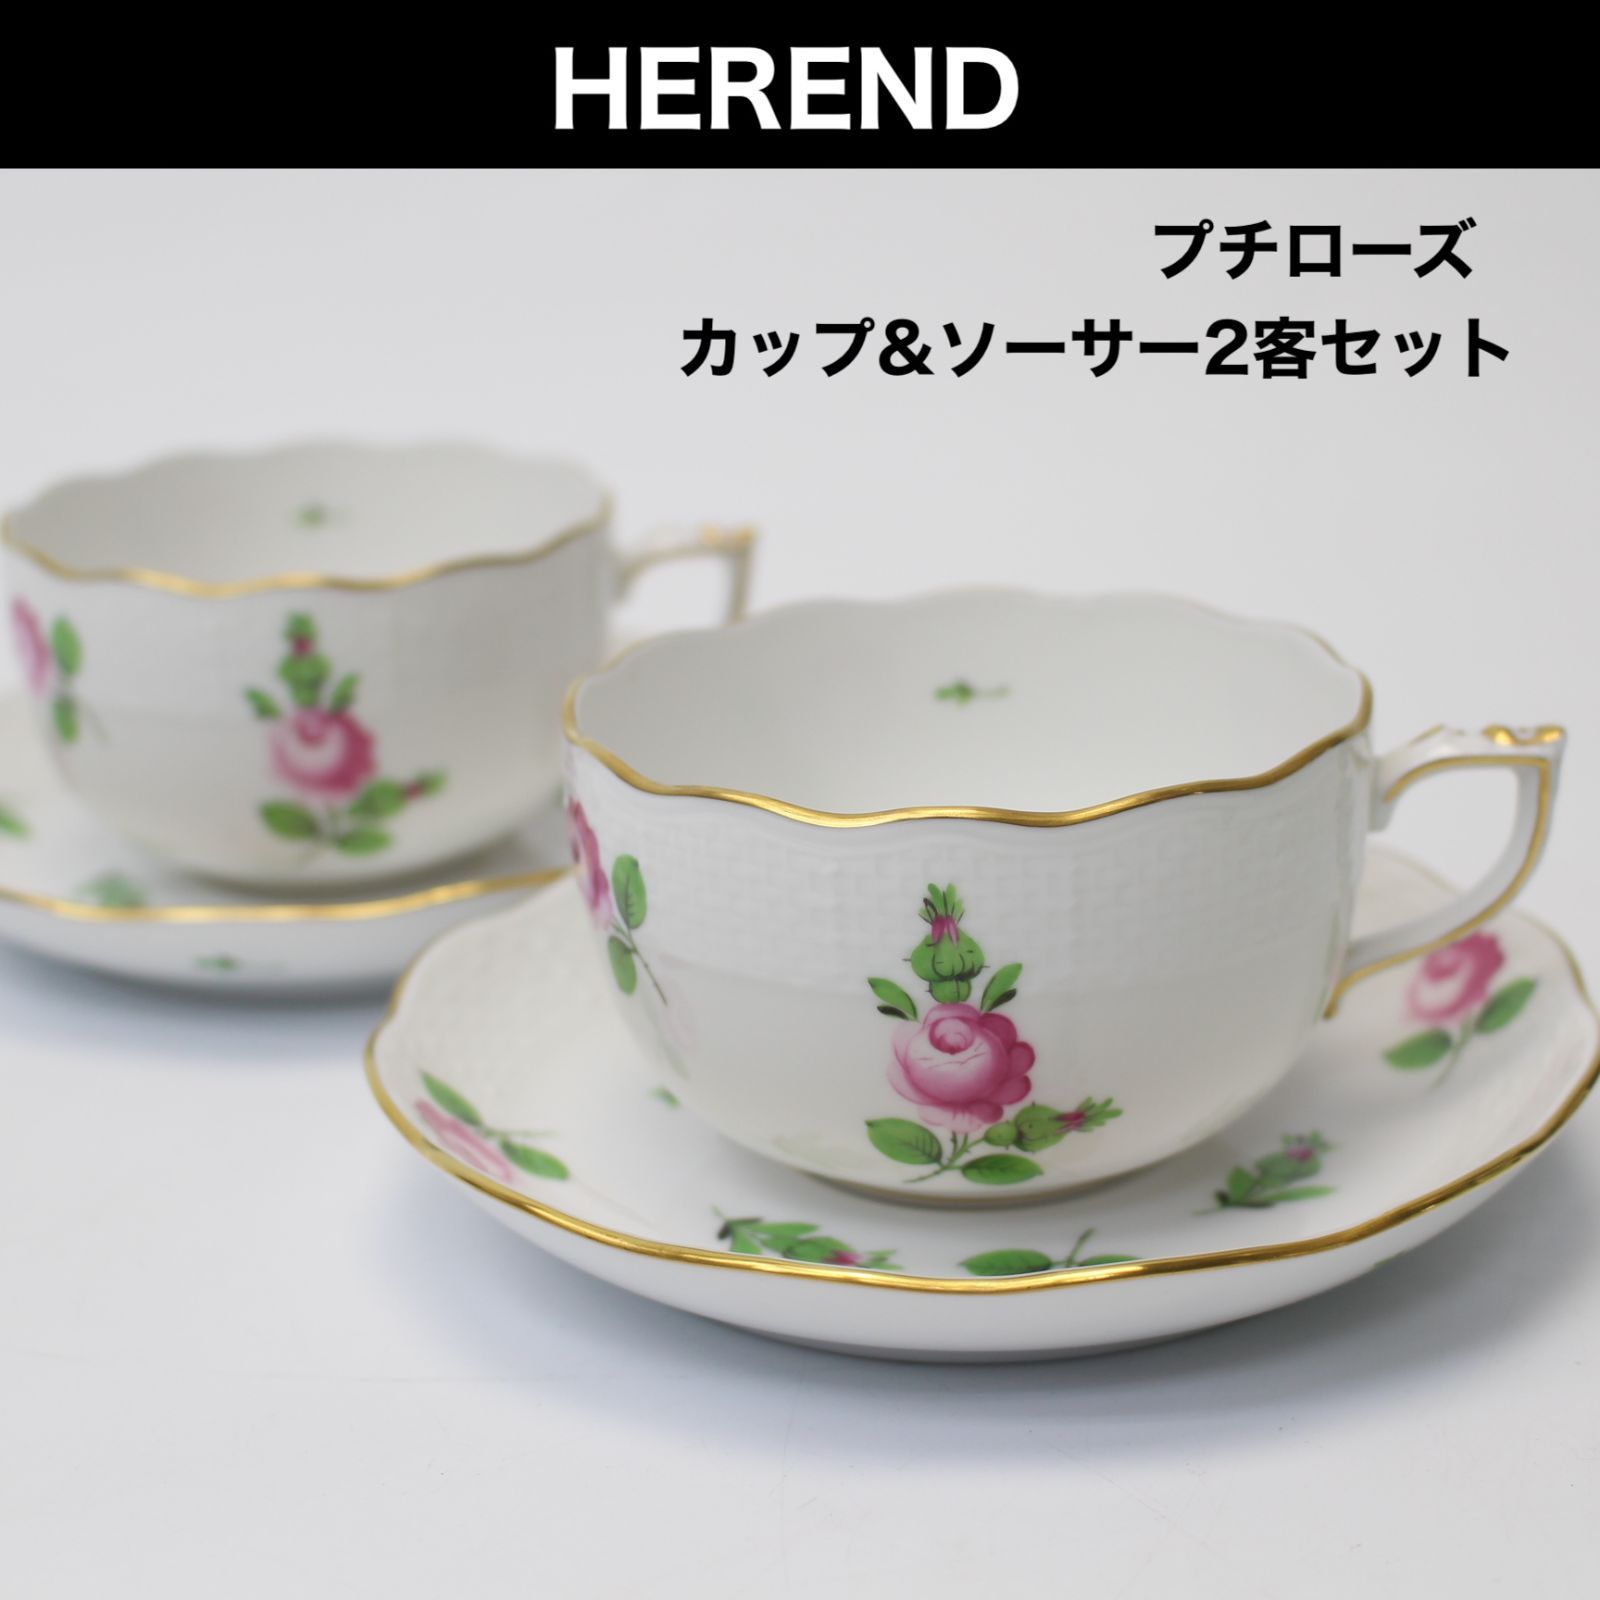 A653】HEREND プチローズ カップ&ソーサー 2客セット ヘレンド